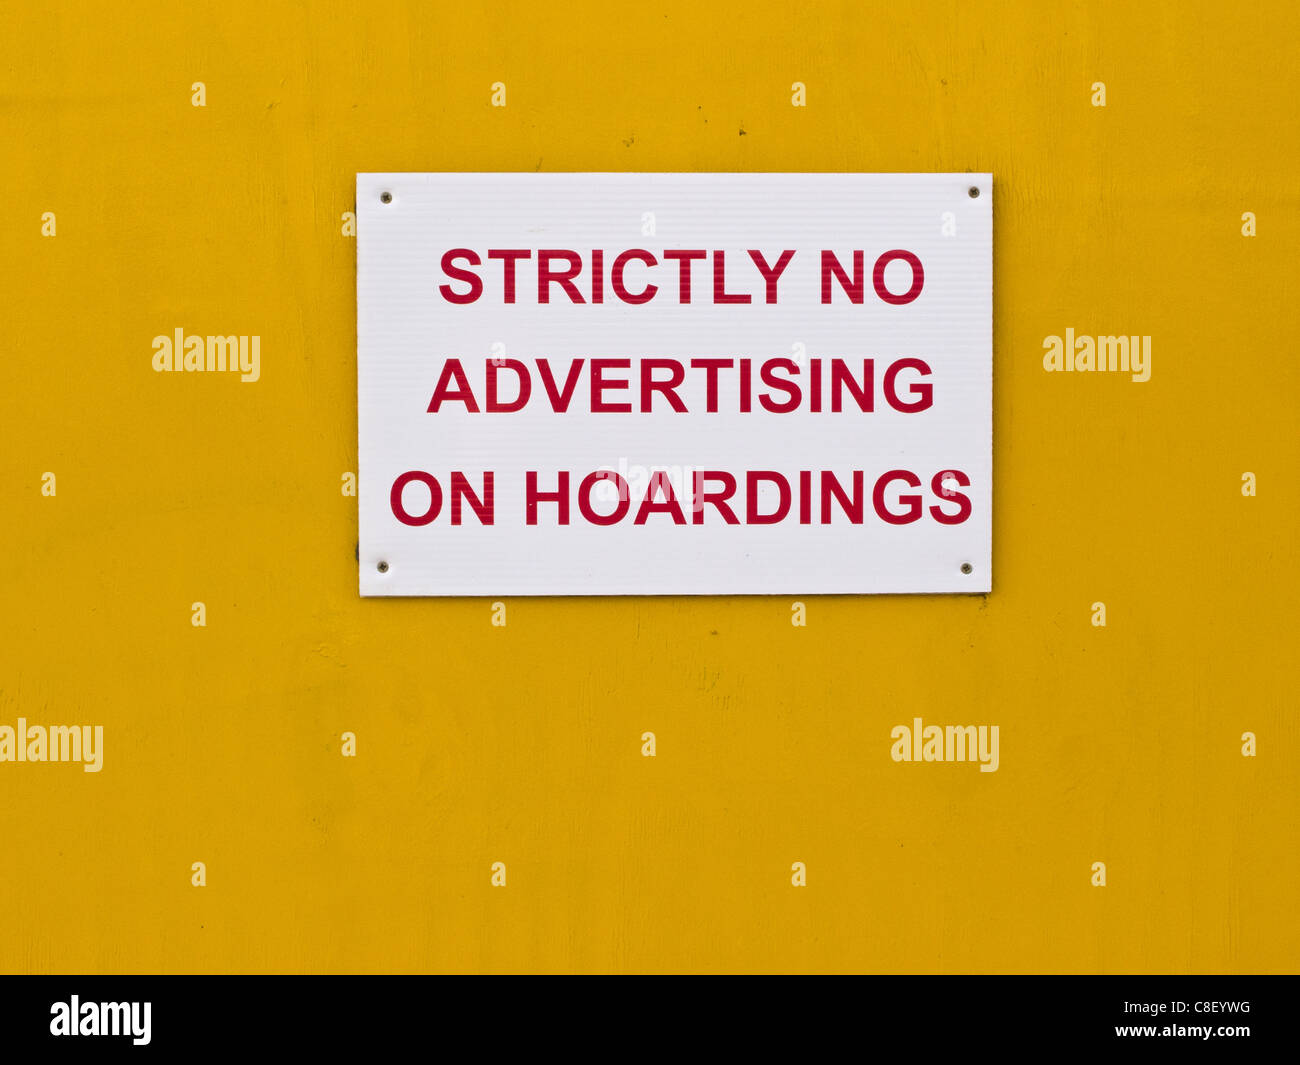 Strictly no advertising on hoardings sign Stock Photo